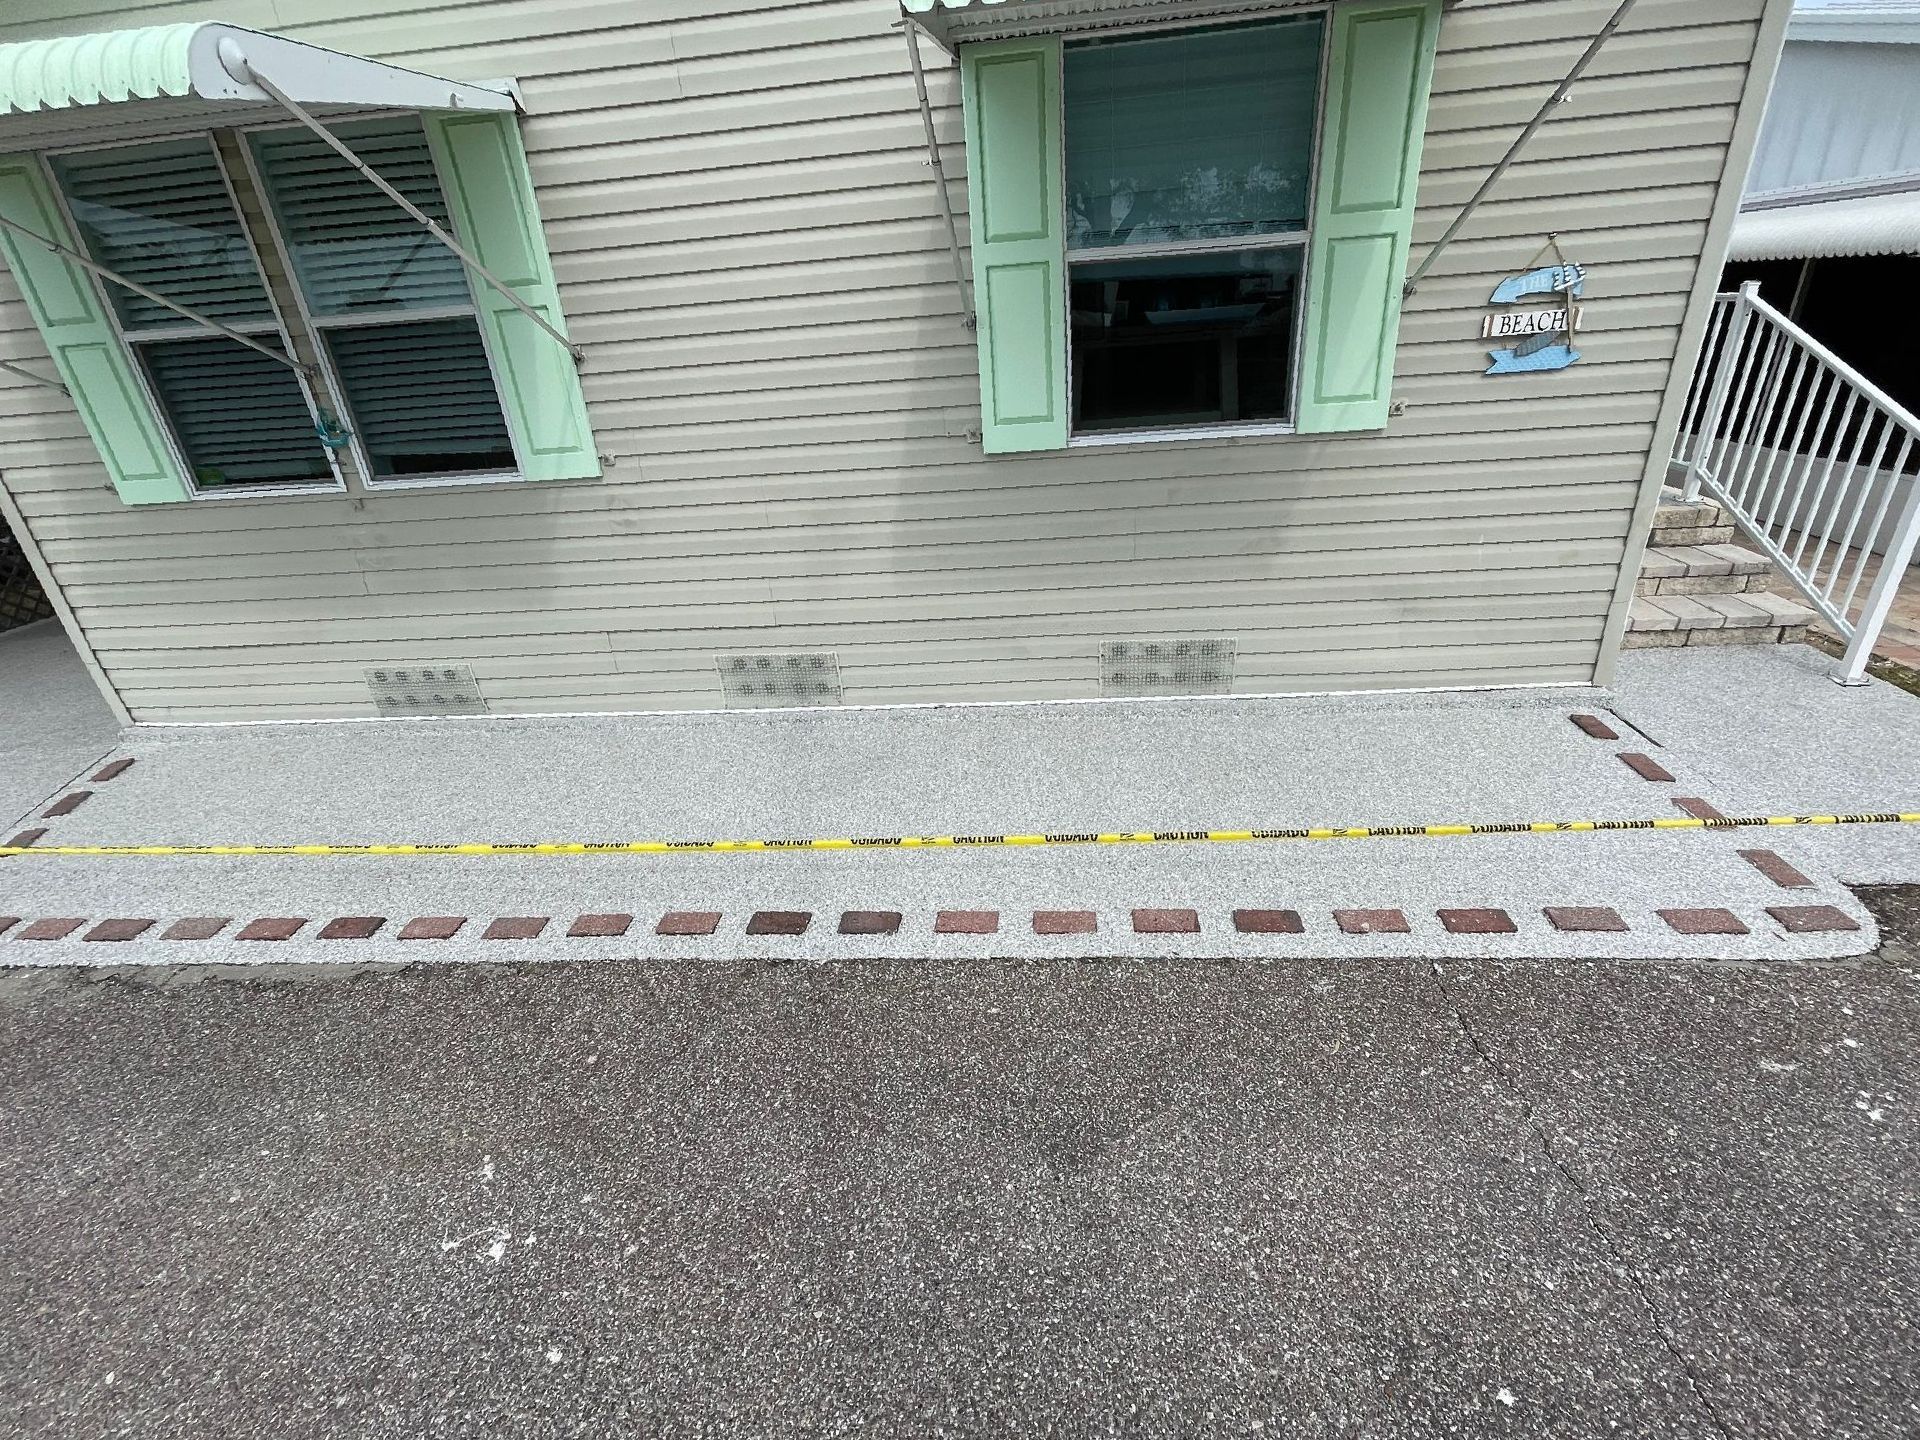 Concrete patio with inlaid brick after new concrete coating has been applied